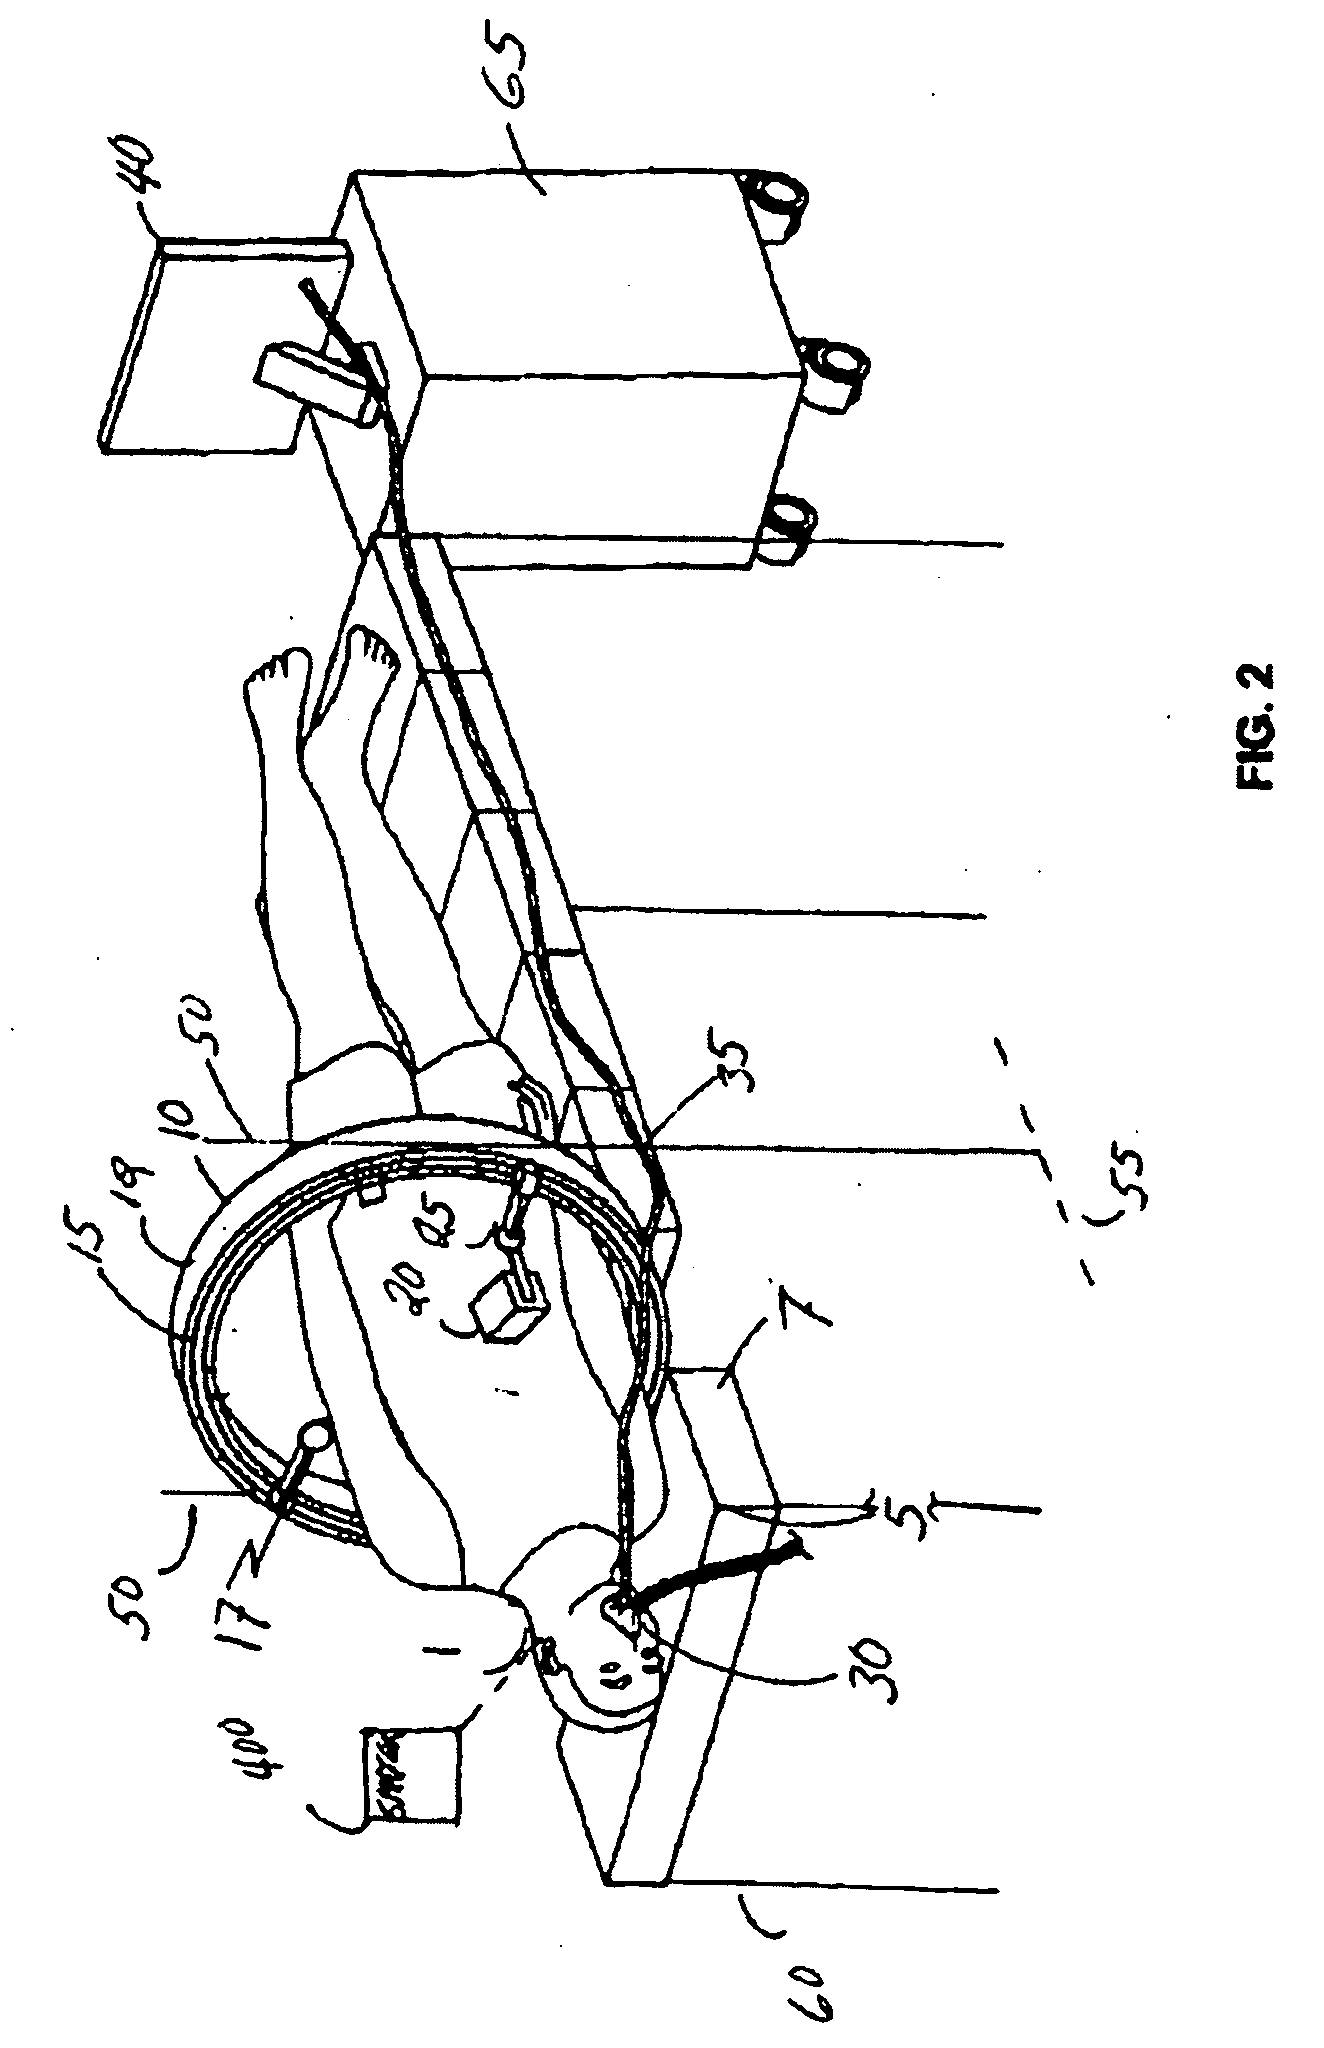 3D Microwave System and Methods